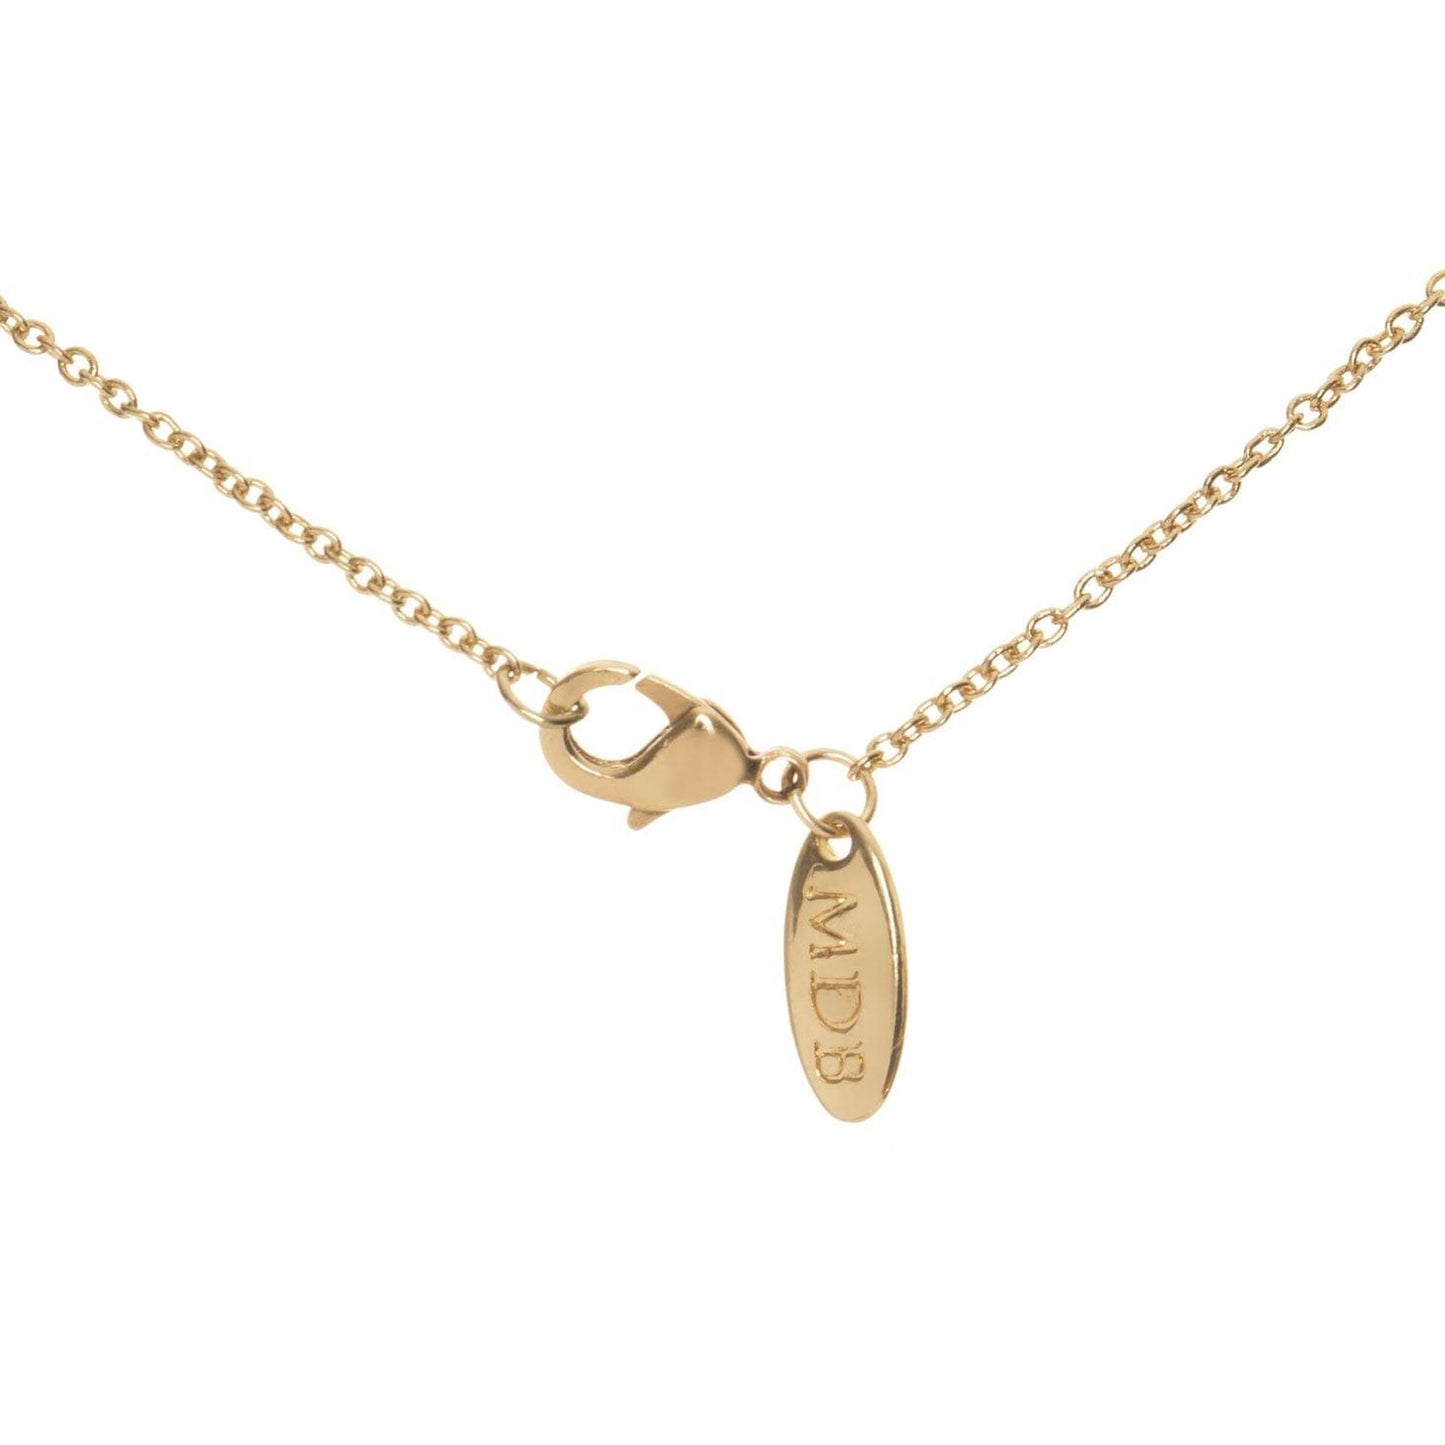 Lumiela Personalized Nameplate Lily Necklace in Gold Tone